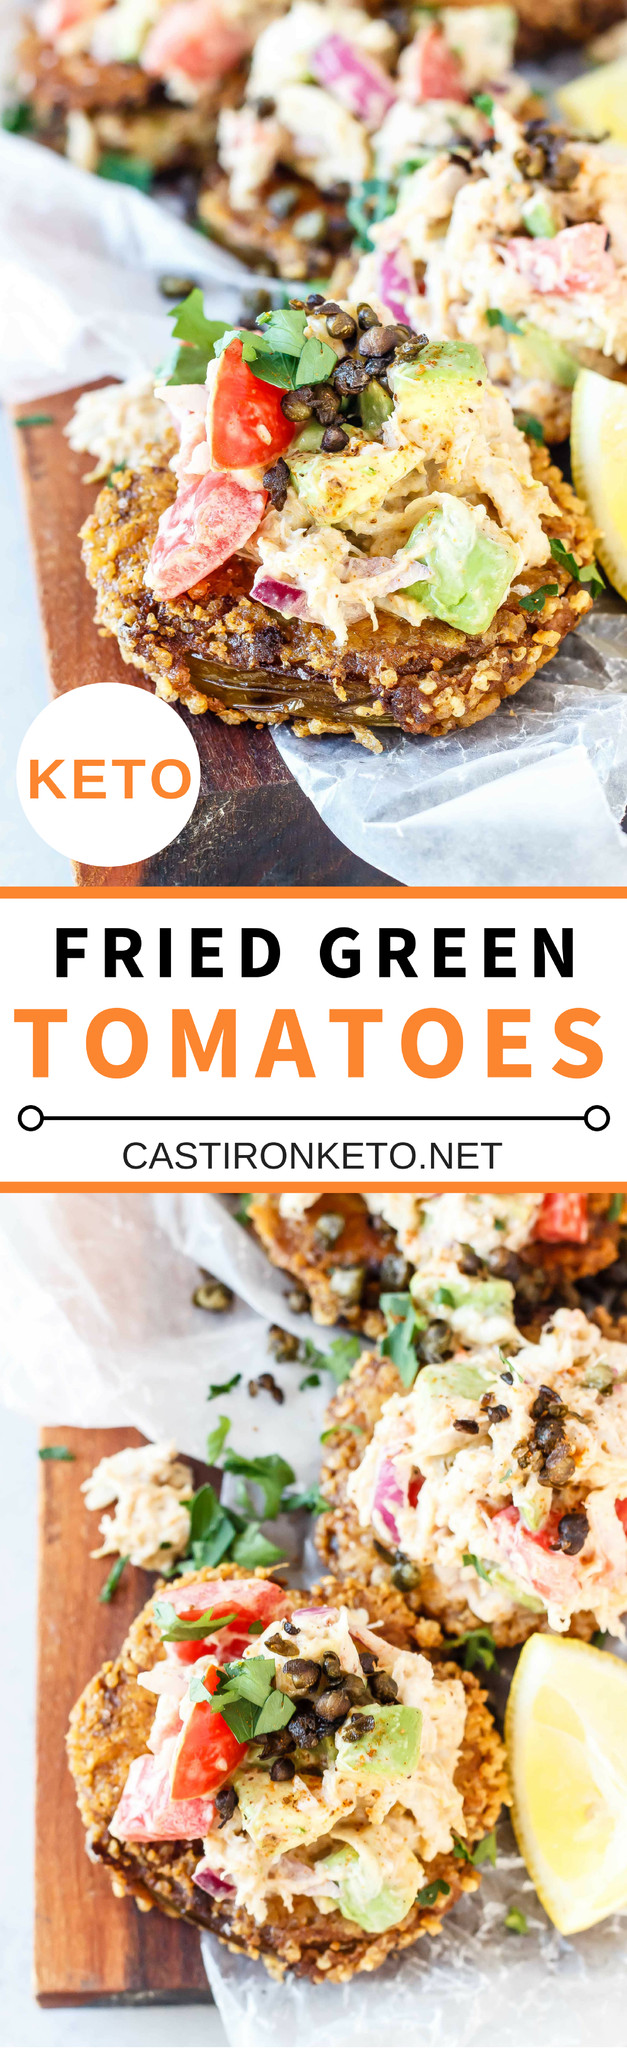 Low Carb Appetizers Atkins
 Keto Fried Green Tomatoes this low carb appetizer makes